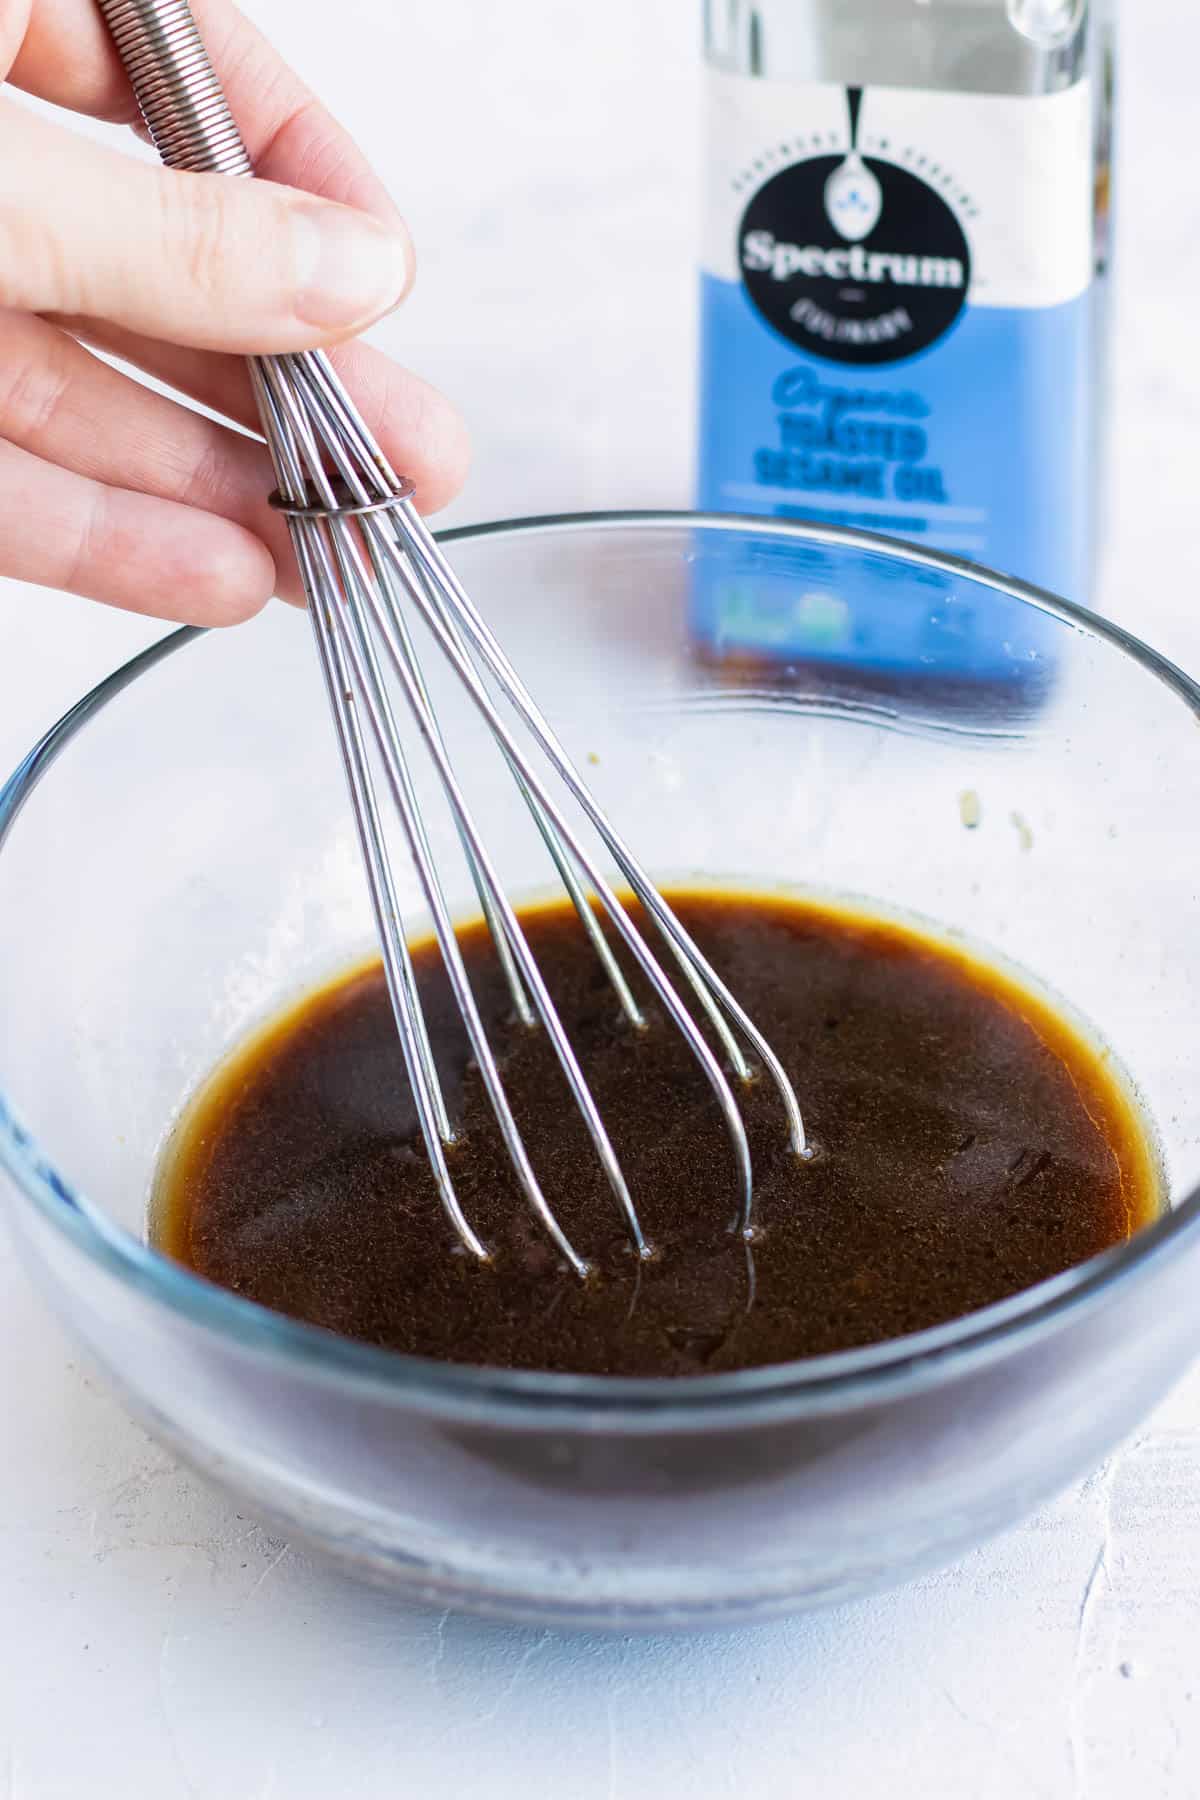 Whisking together the sesame sauce ingredients in a clear bowl with a bottle of toasted sesame oil.